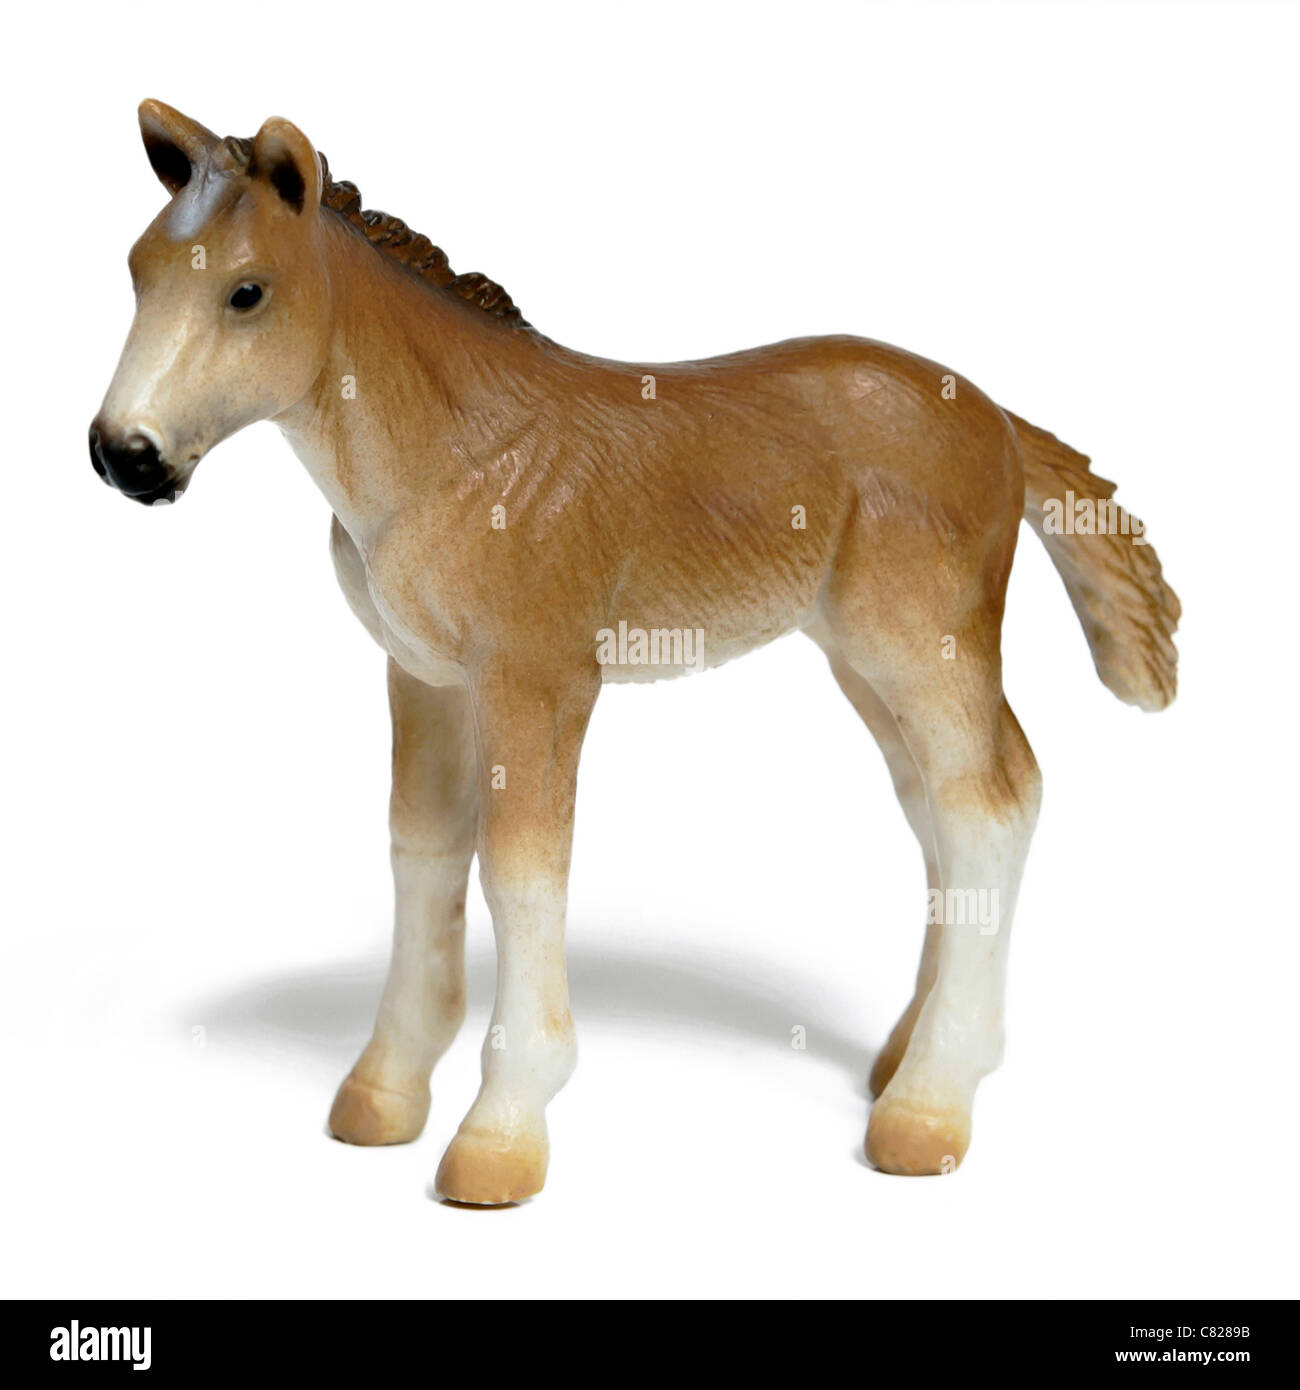 Plastic toy horse foal figurine isolated on white background  Model Release: No. Property Release: No.  All image available for licensing and fine art prints. Use contact details, preferably e-mail martin@martincarlsson.photography or martin@carlssoninc.se Stock Photo